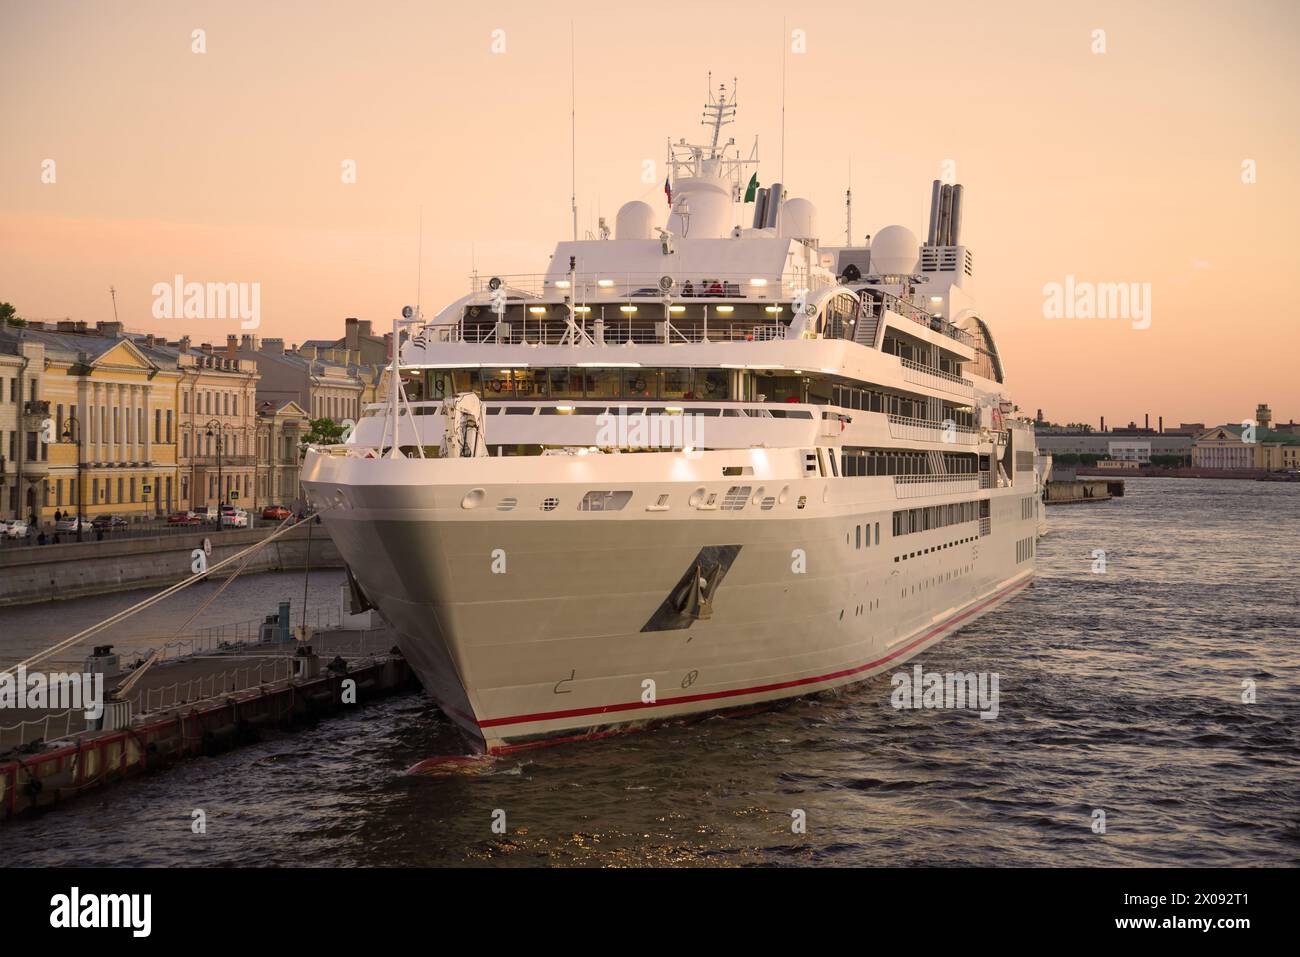 ST. PETERSBURG, RUSSIA - MAY 27, 2018: The luxury sea passenger cruise liner 'Le Soleal' at the English embankment  in the May evening Stock Photo